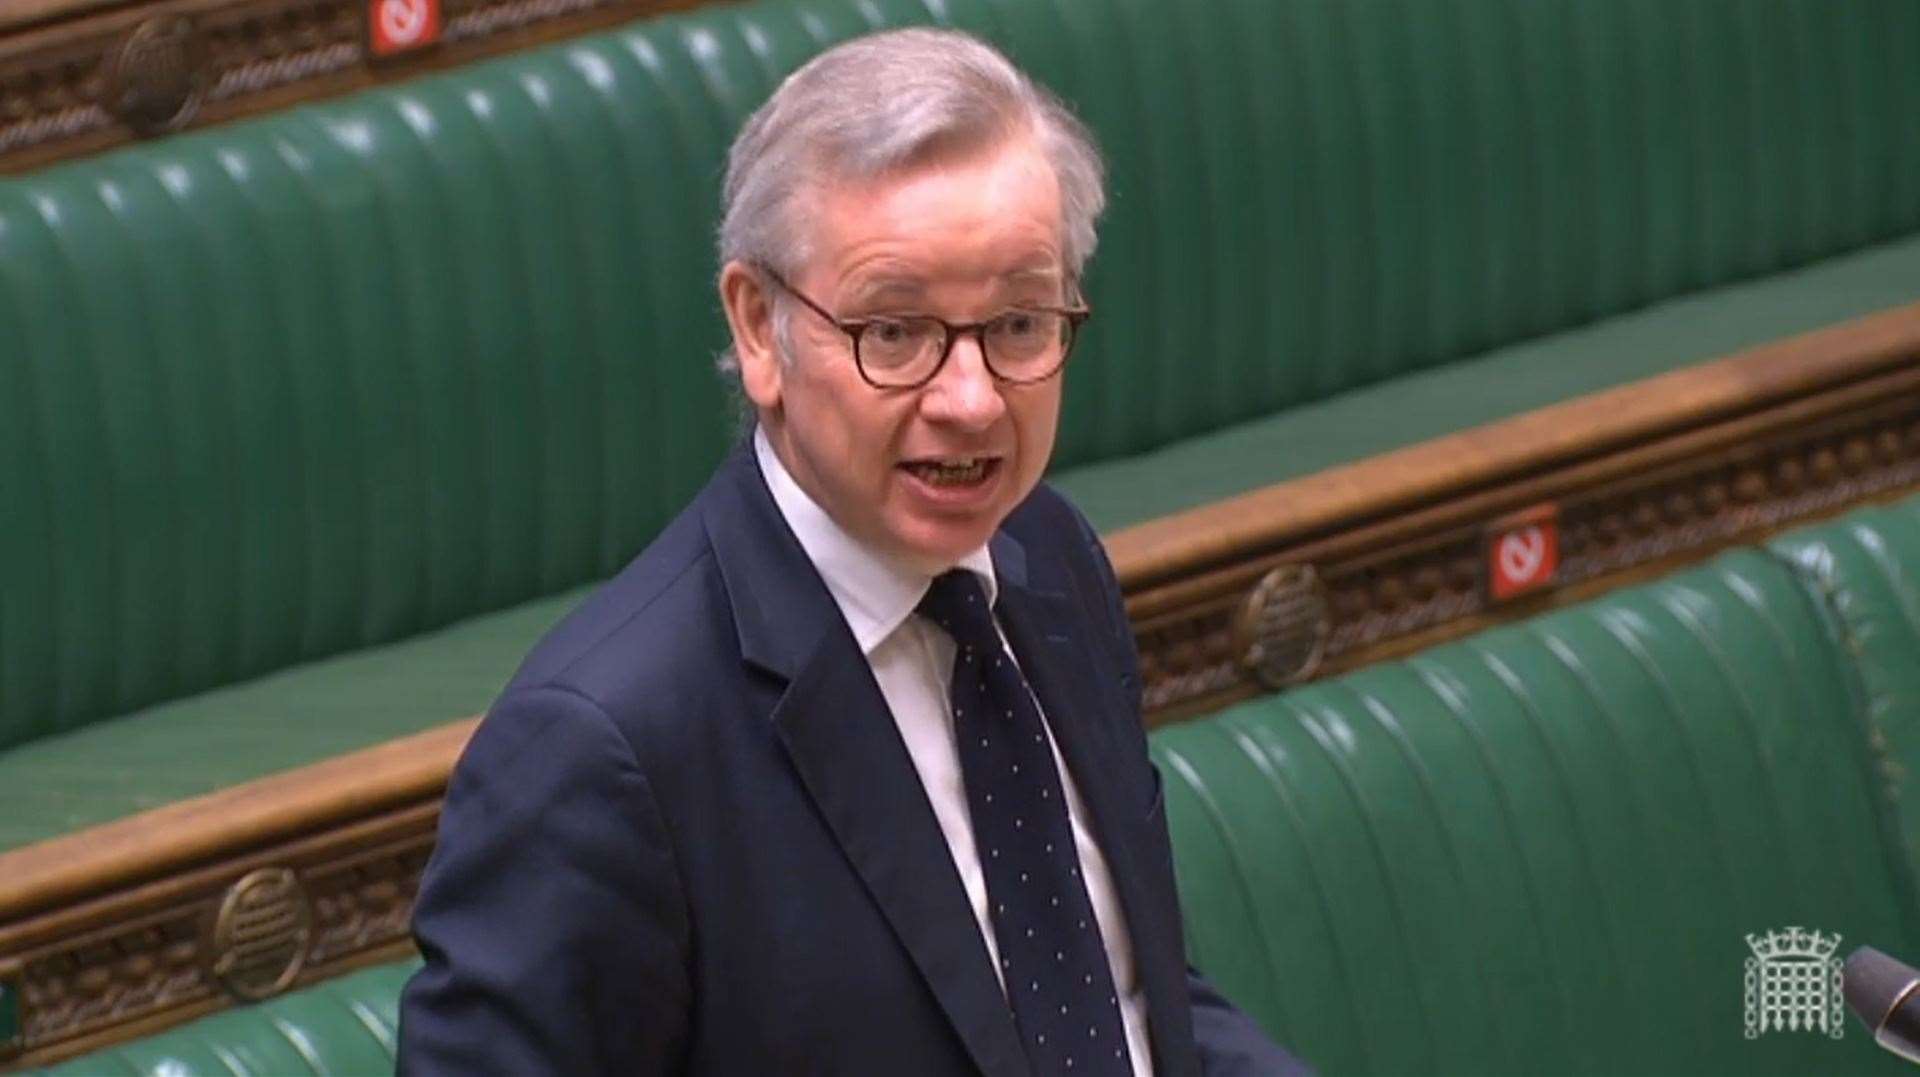 Cabinet Office minister Michael Gove answers a question from former PM Theresa May about the new national security adviser (House of Commons/PA)